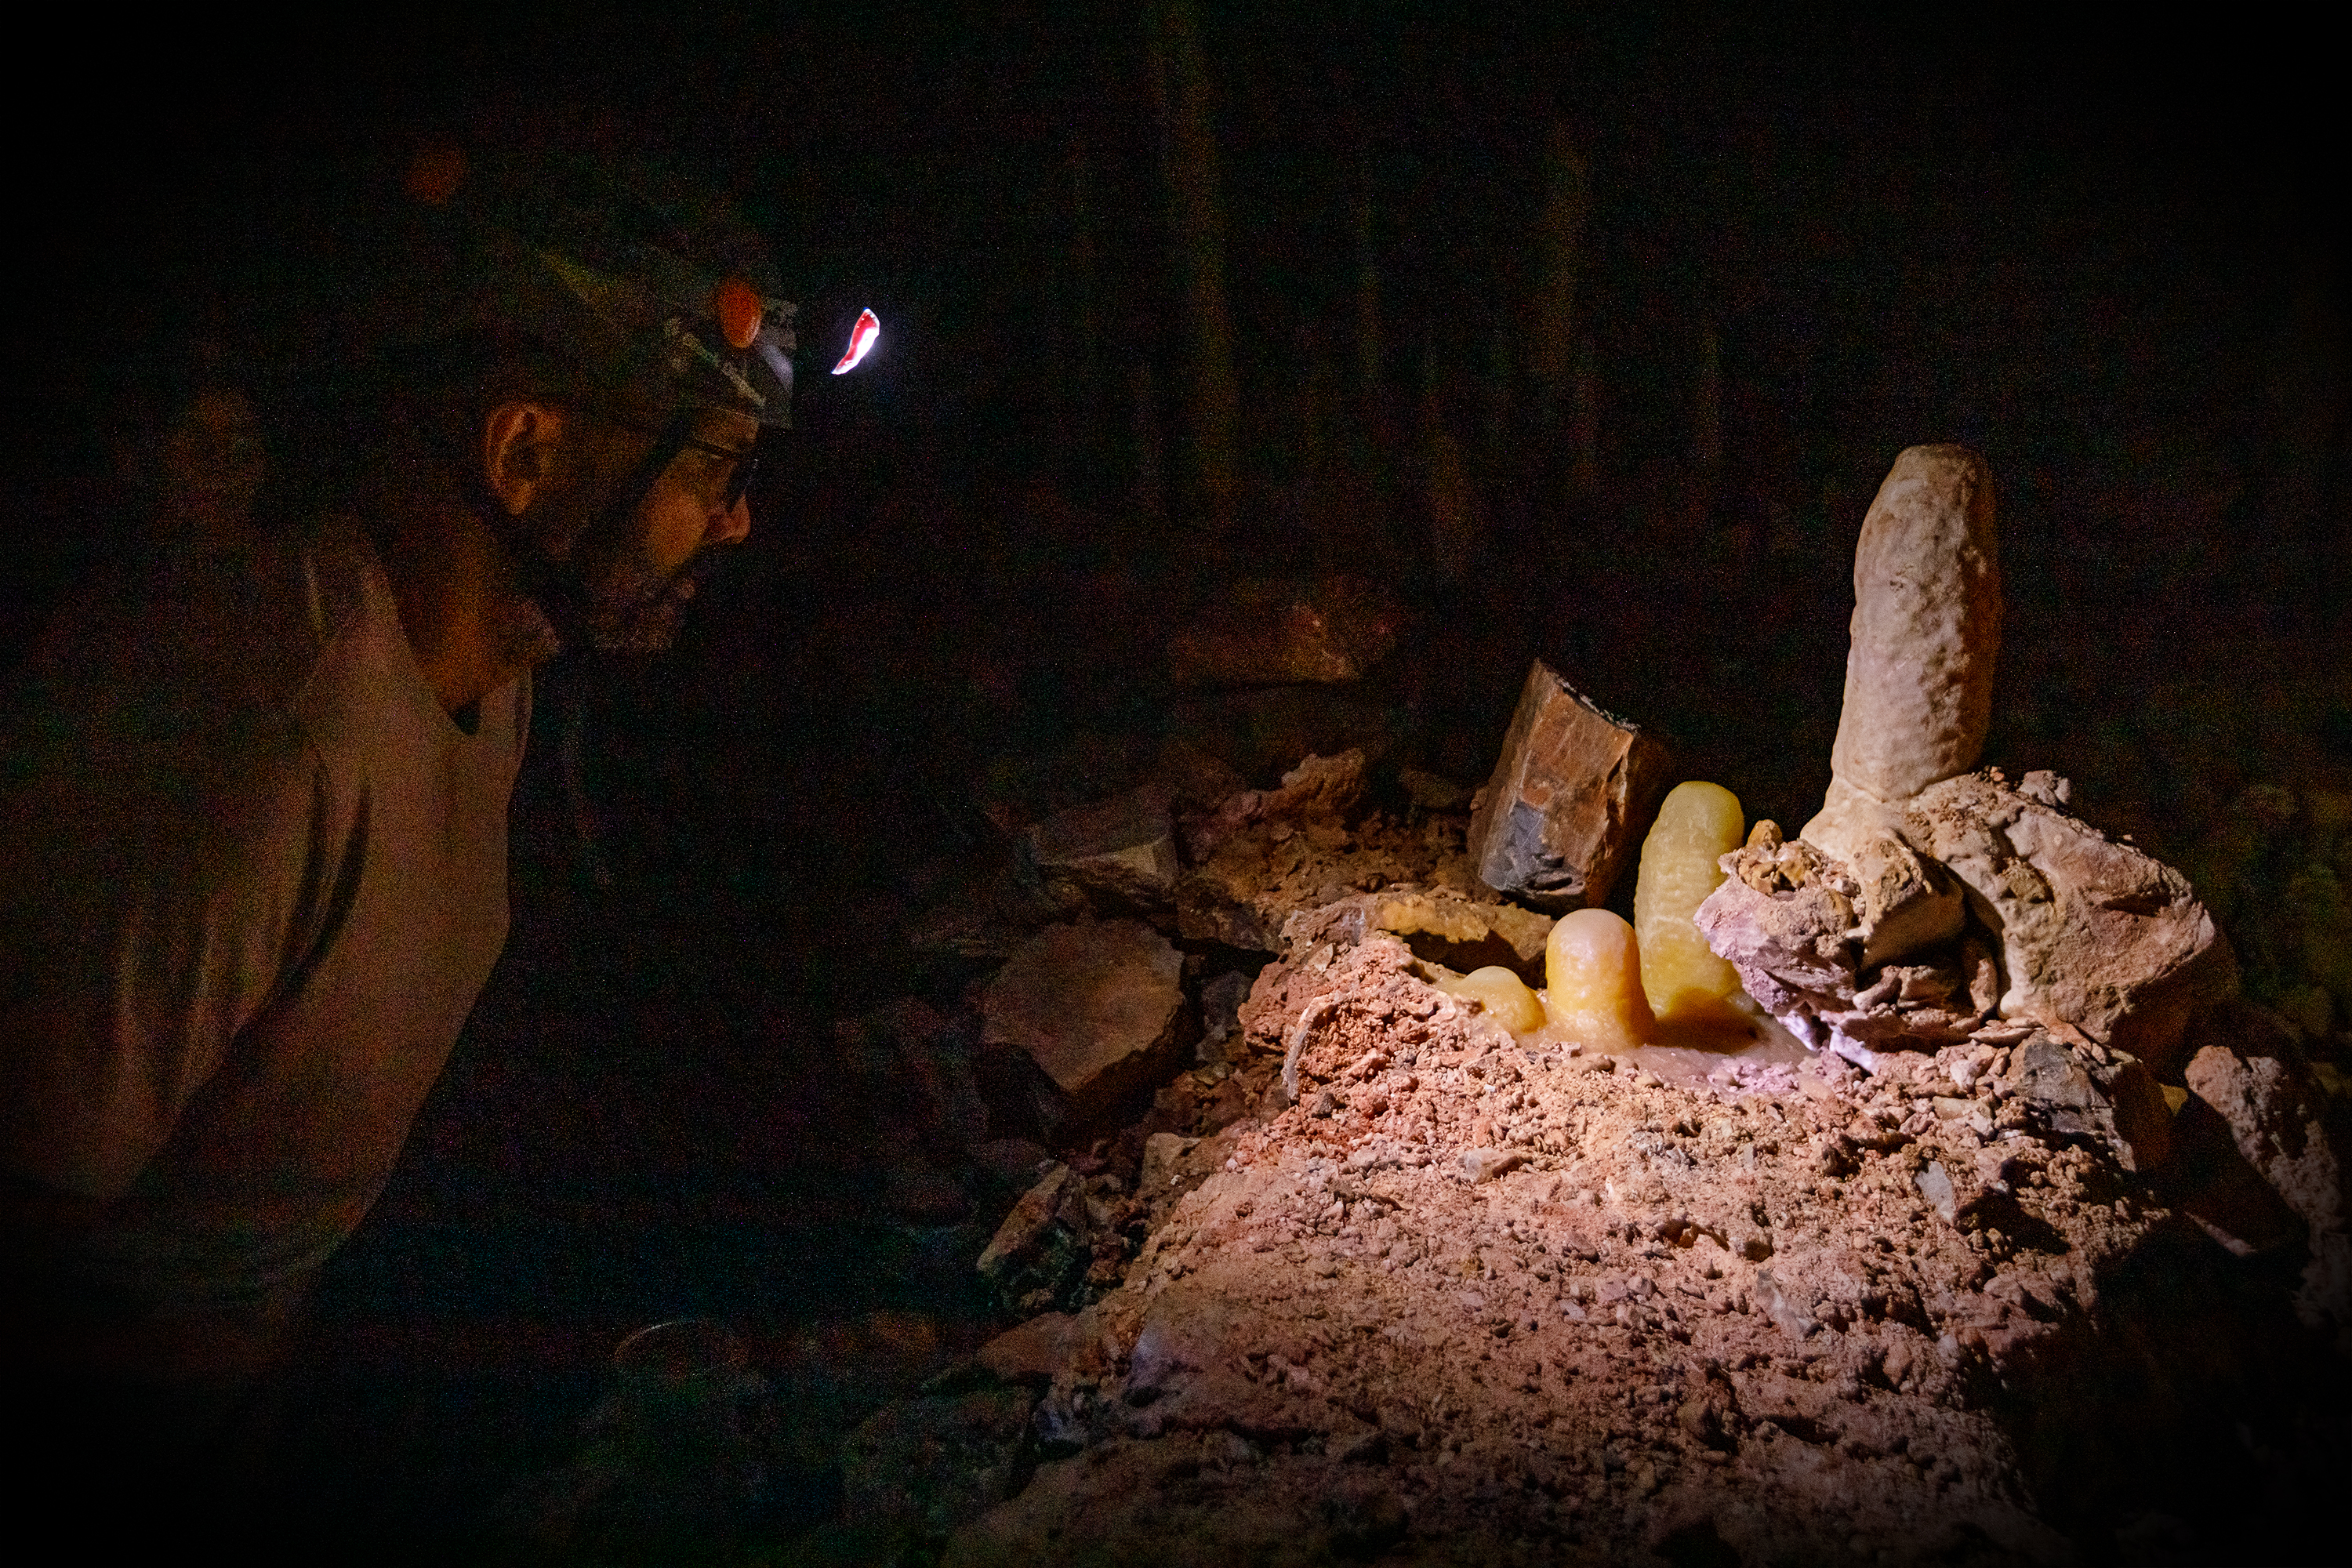 A visitor wearing a headlamp shines the light on a cave formation during the Helmet & Headlamp tour